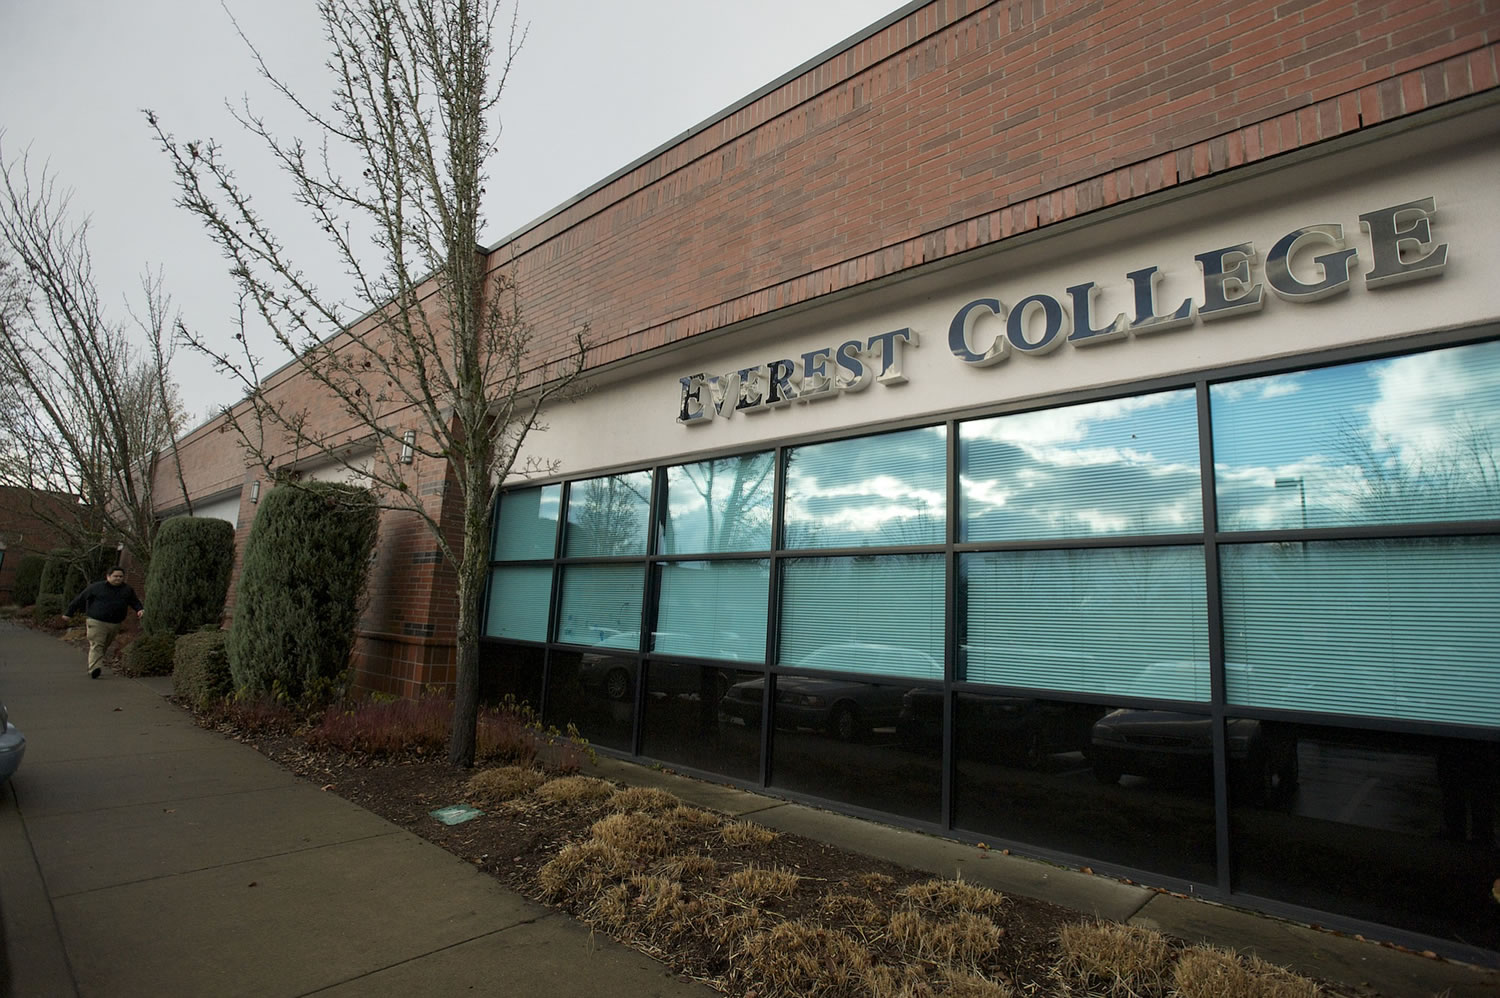 The Everest College campus in Vancouver.